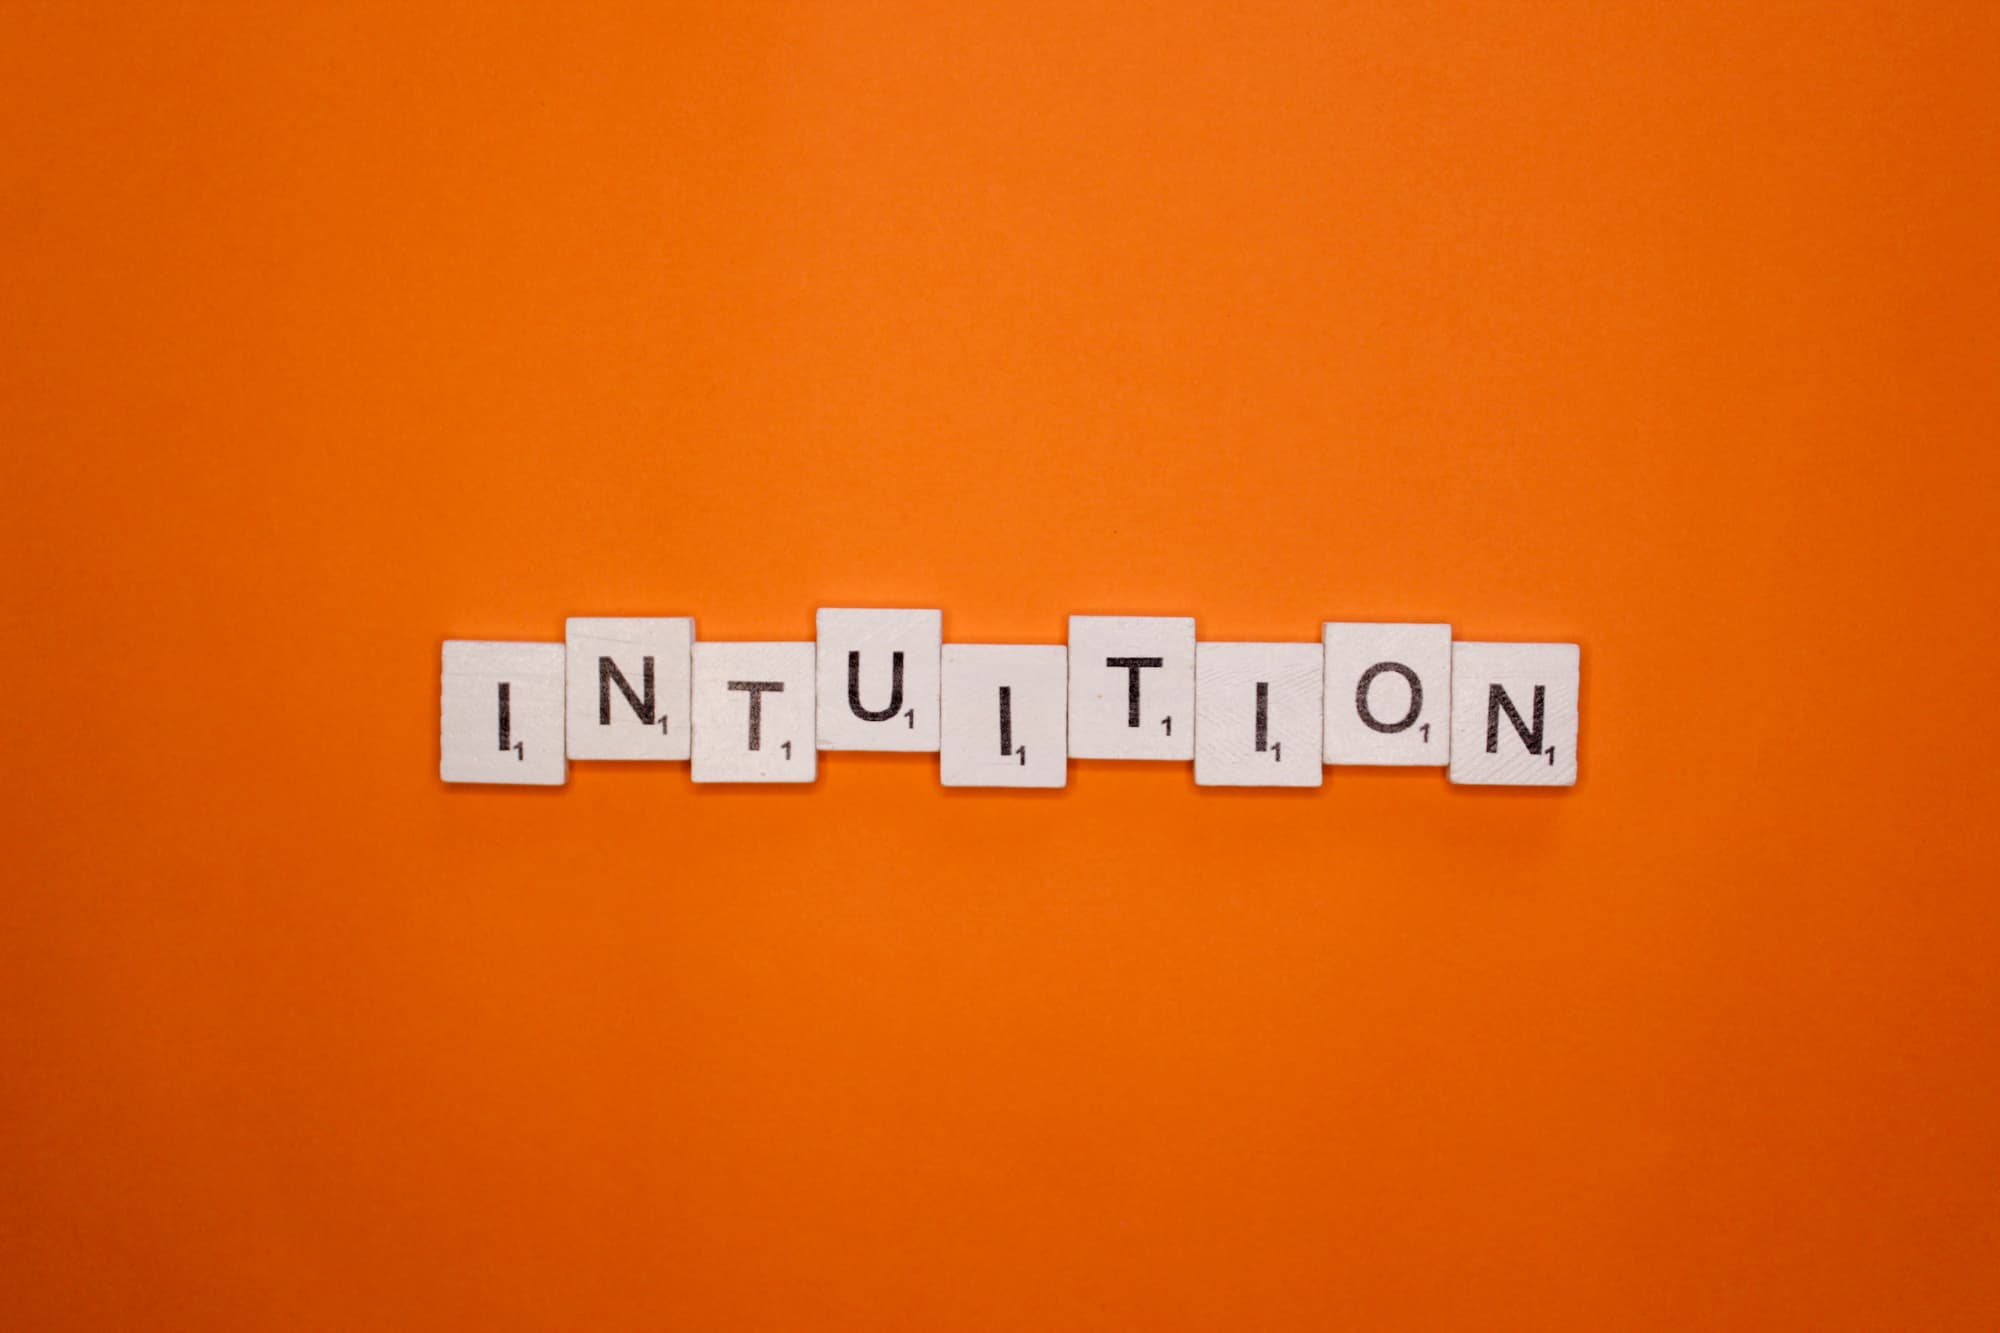 How to Use Your Intuition In Your Business and Live the Life of Your Dreams